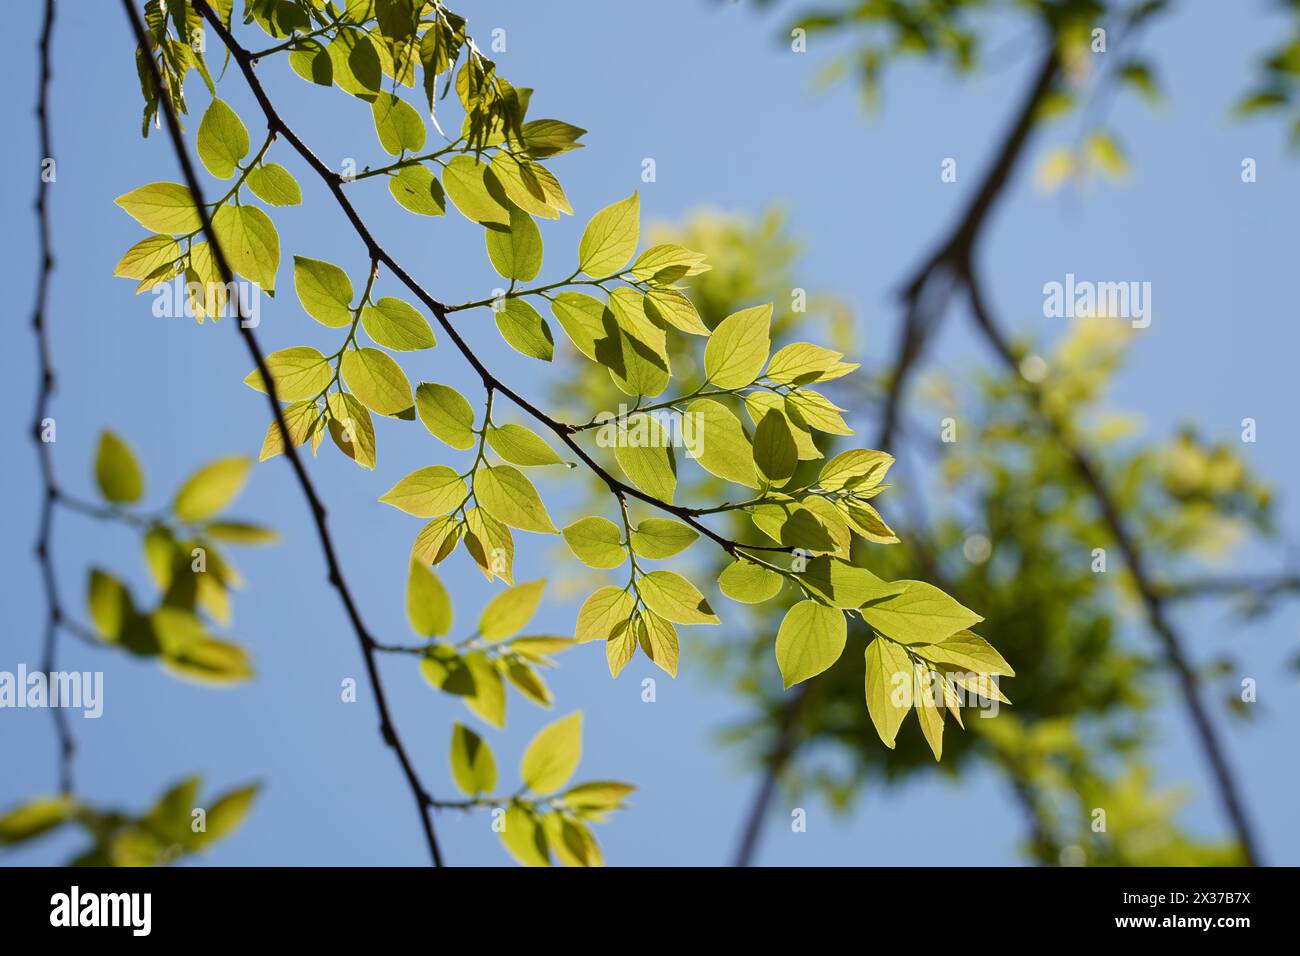 Branches and leaves of Chinese hackberry Nettle tree (Celtis sinensis ) Stock Photo